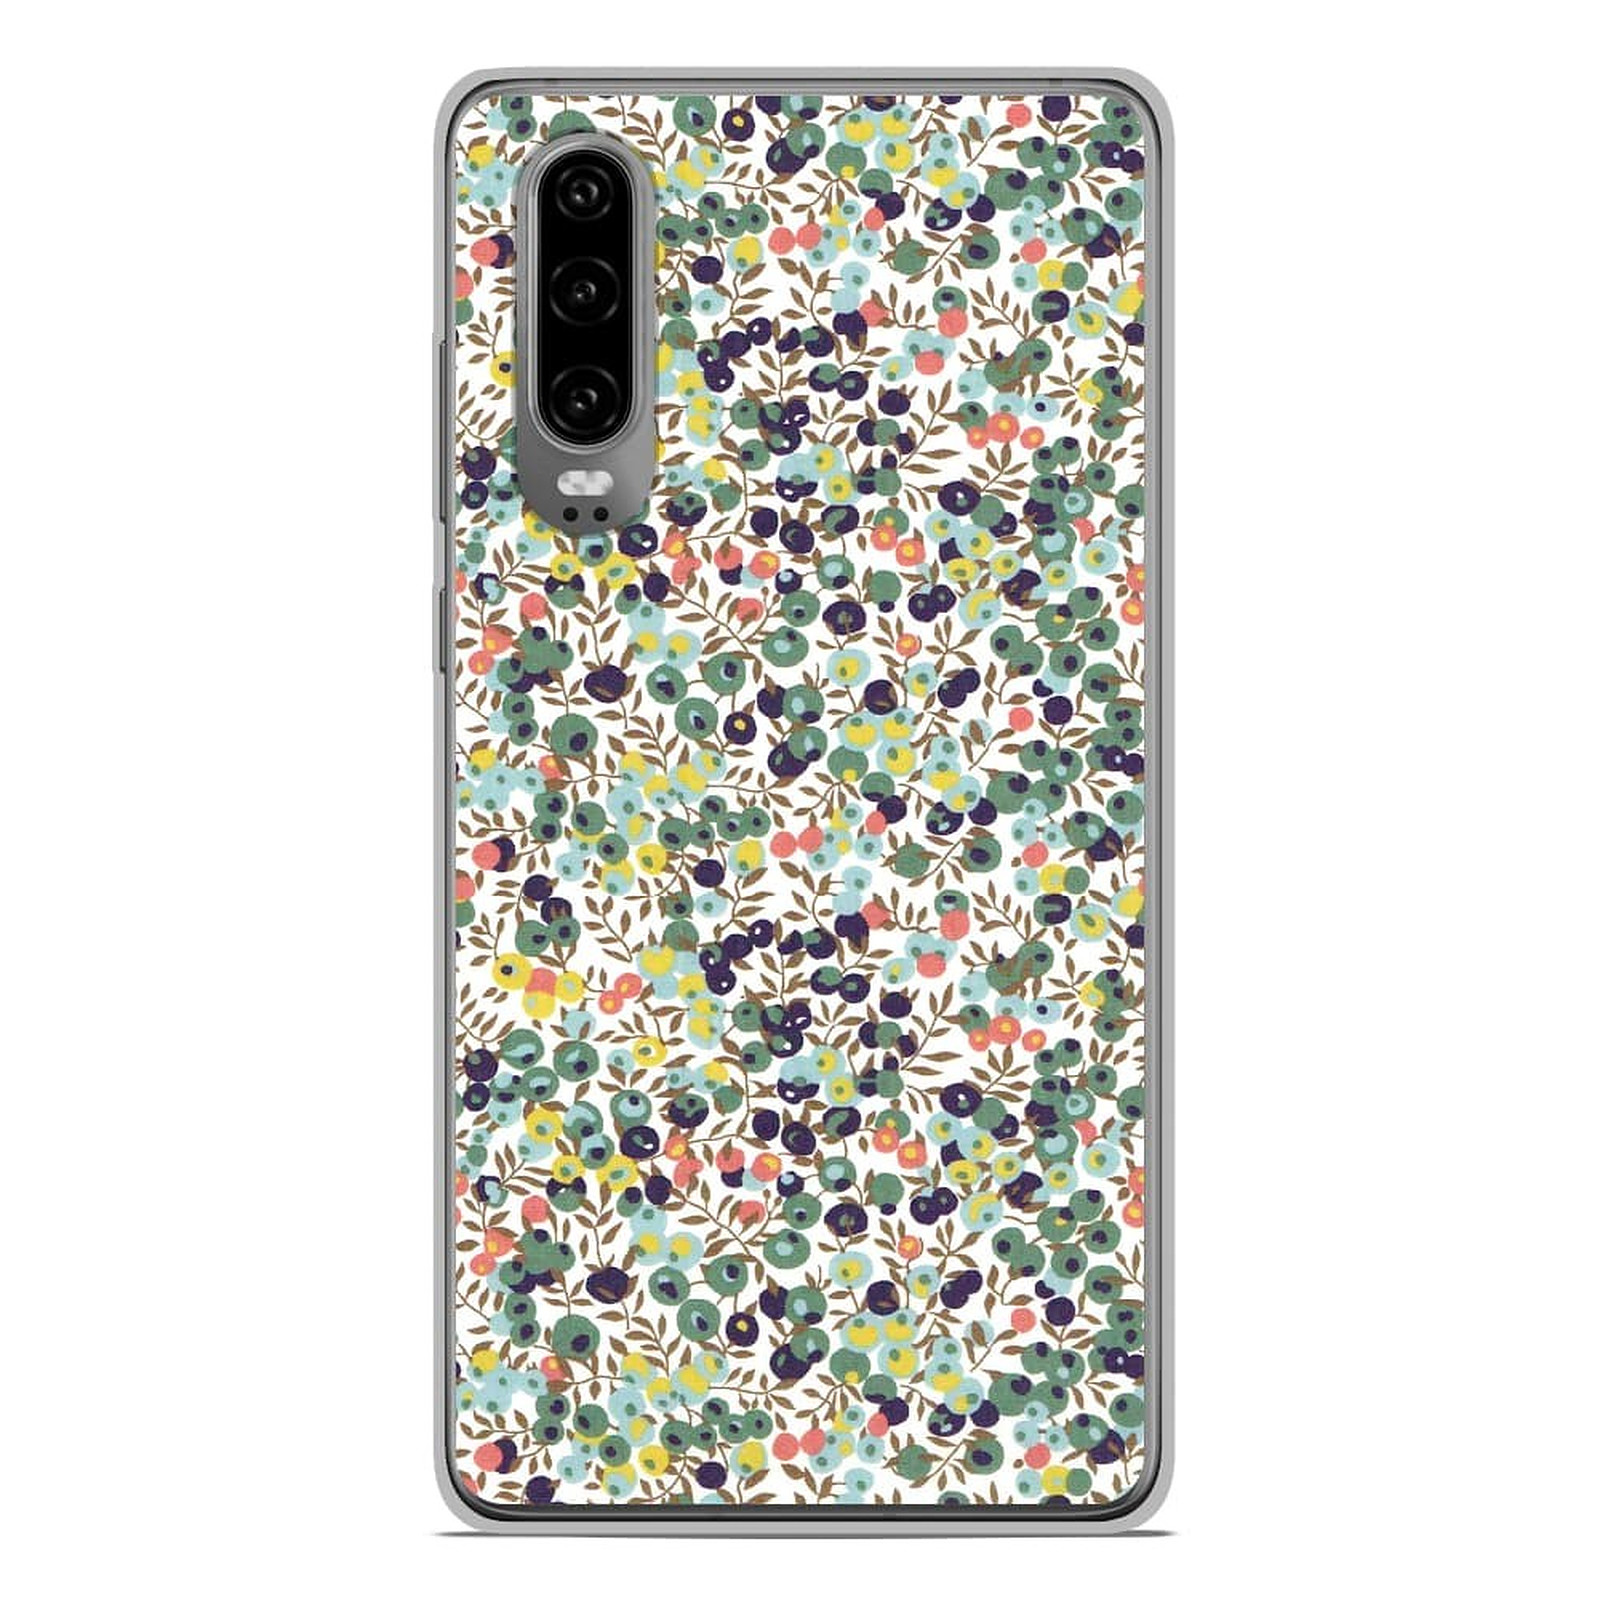 1001 Coques Coque silicone gel Huawei P30 motif Liberty Wiltshire Vert - Coque telephone 1001Coques